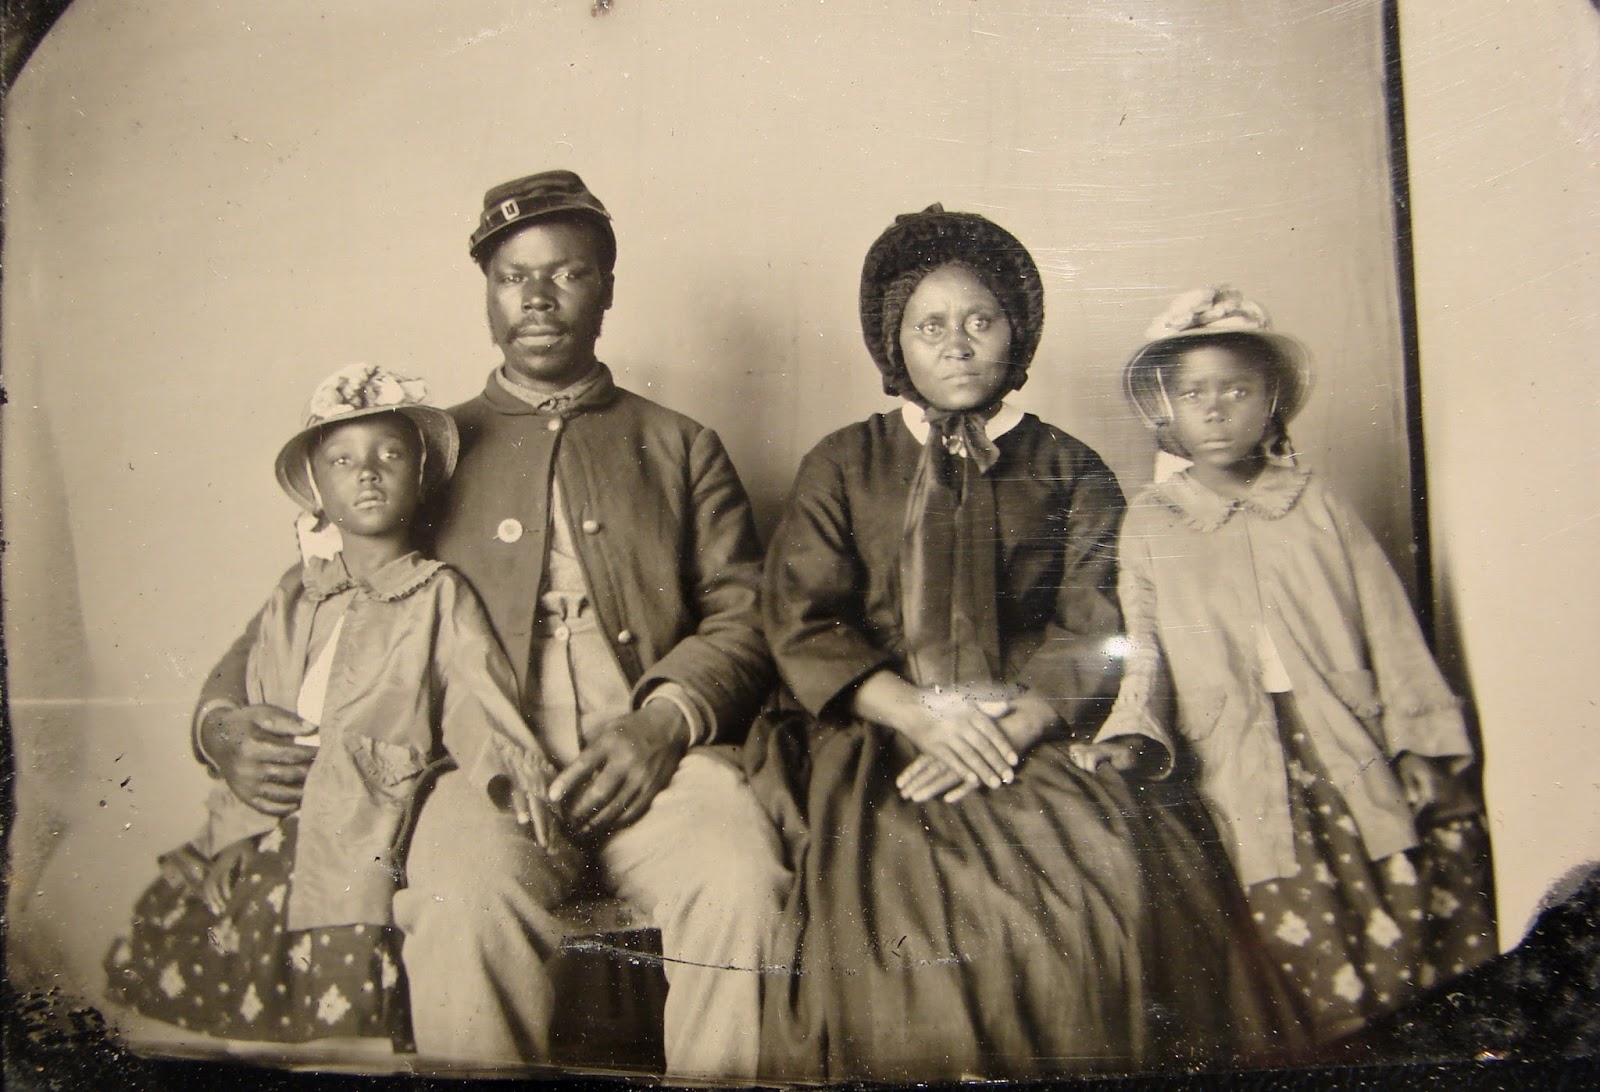 25 Breathtaking Photos From The Past - The only known photograph of an African American Union soldier with his family. c1863-65